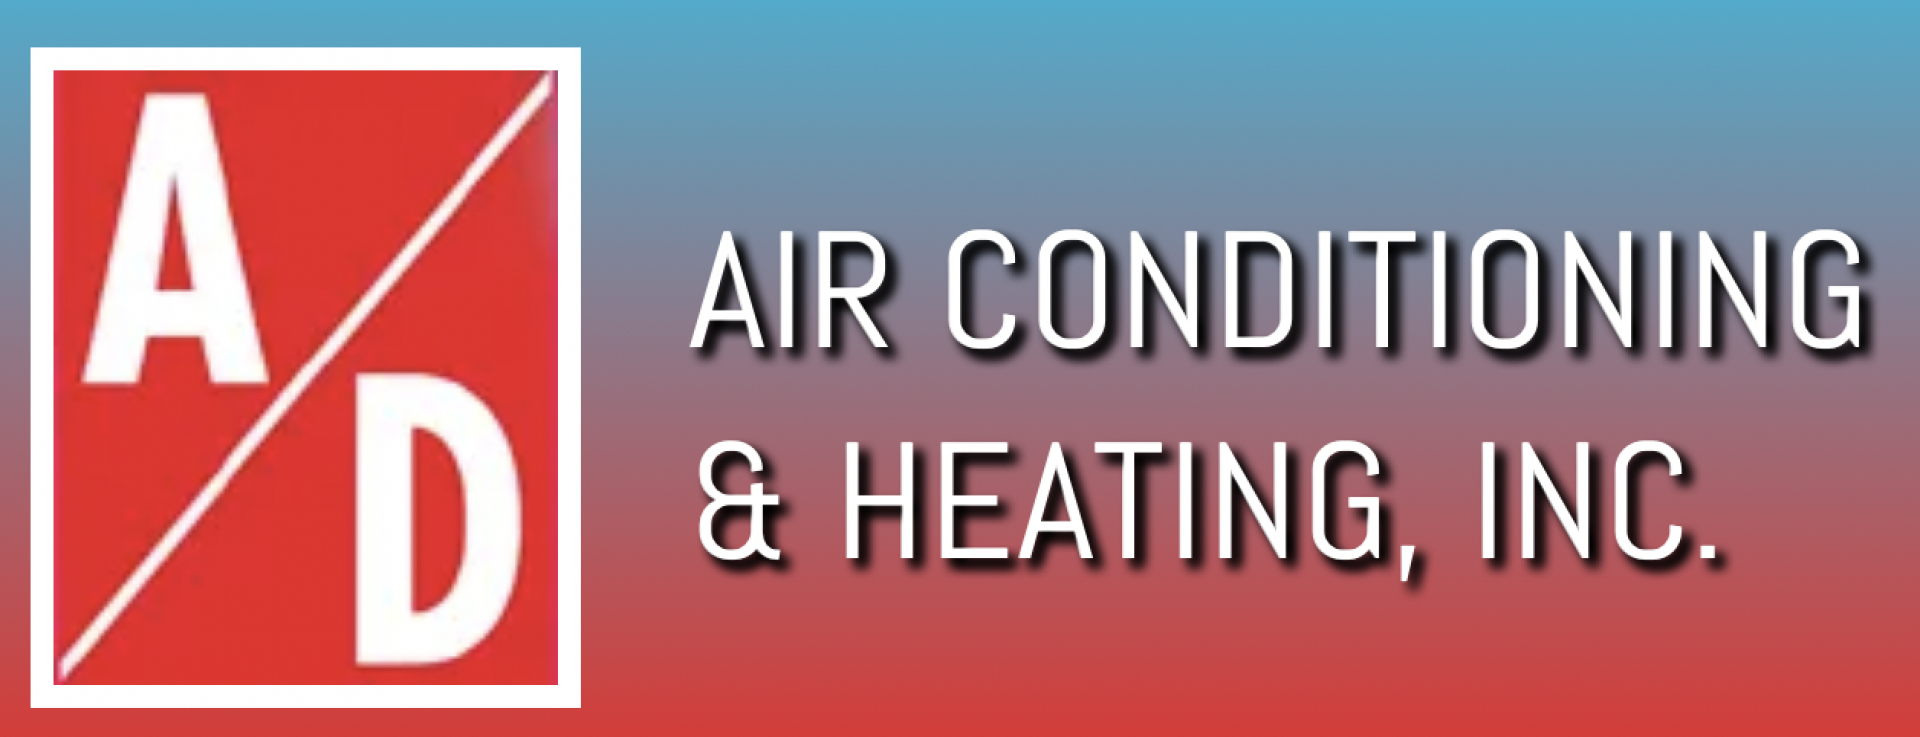 A/D Air Conditioning & Heating, Inc. logo